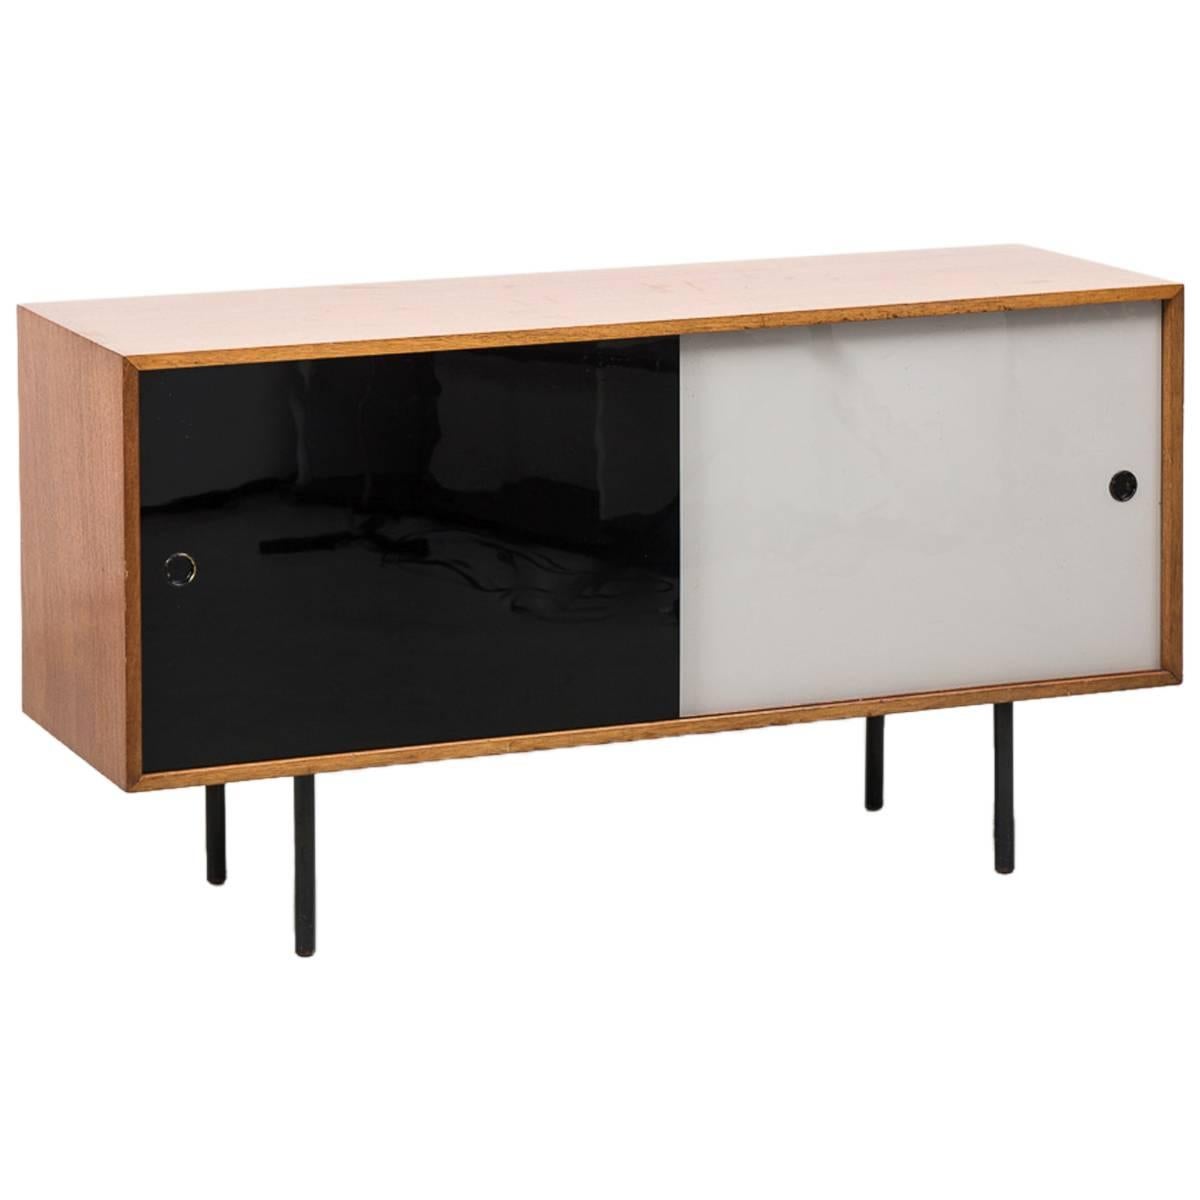 Robin Day Interplan Sideboard for Hille, UK, 1950s